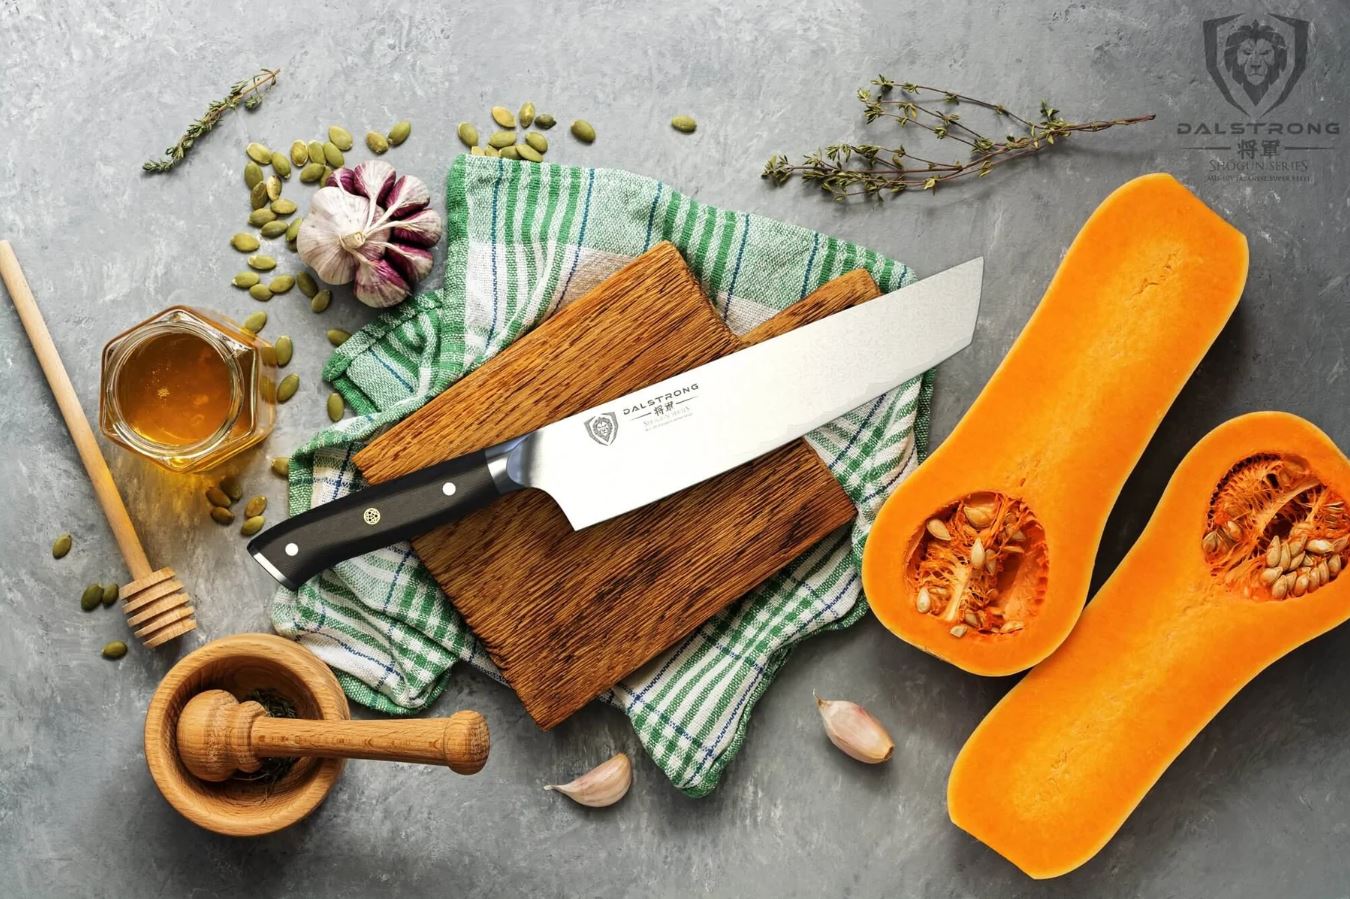 I love a cute knife set. In fact, I love any type of set. Just